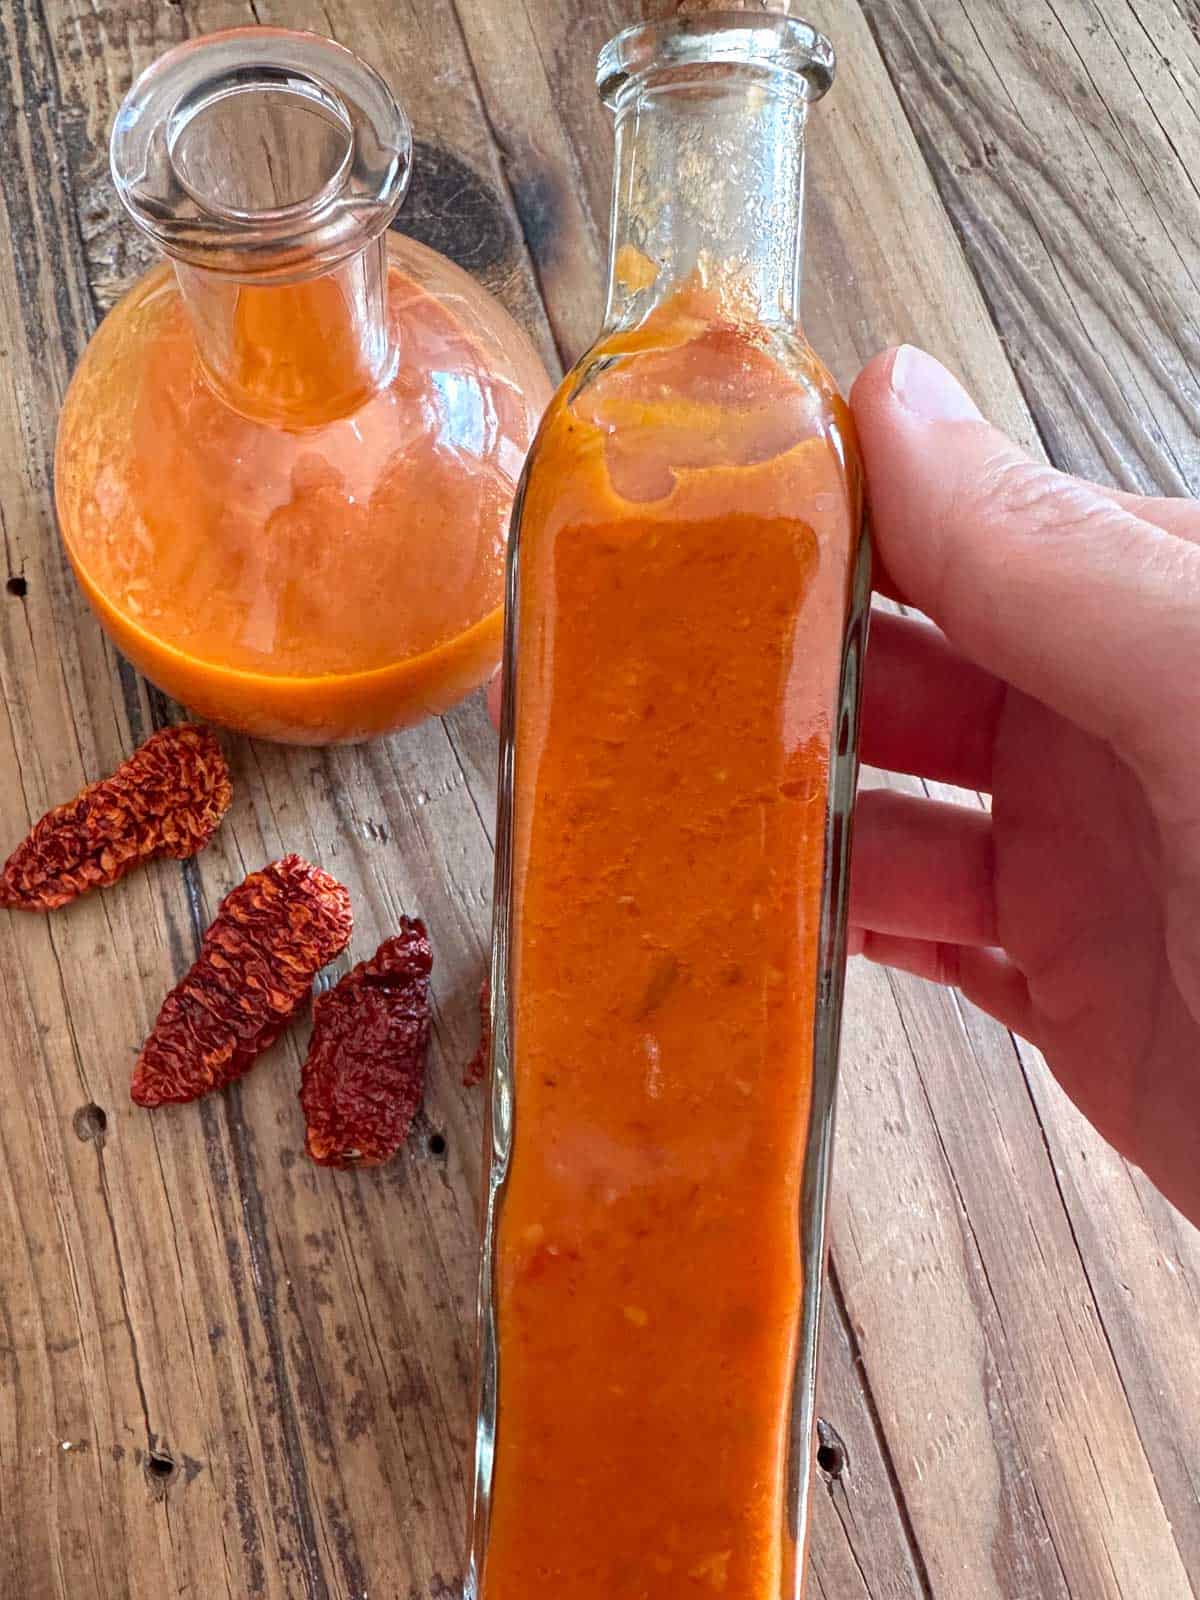 Glass bottles containing homemade ghost pepper hot sauce and some dried ghost peppers by the glass bottles and a person is holding one of the glass bottles.